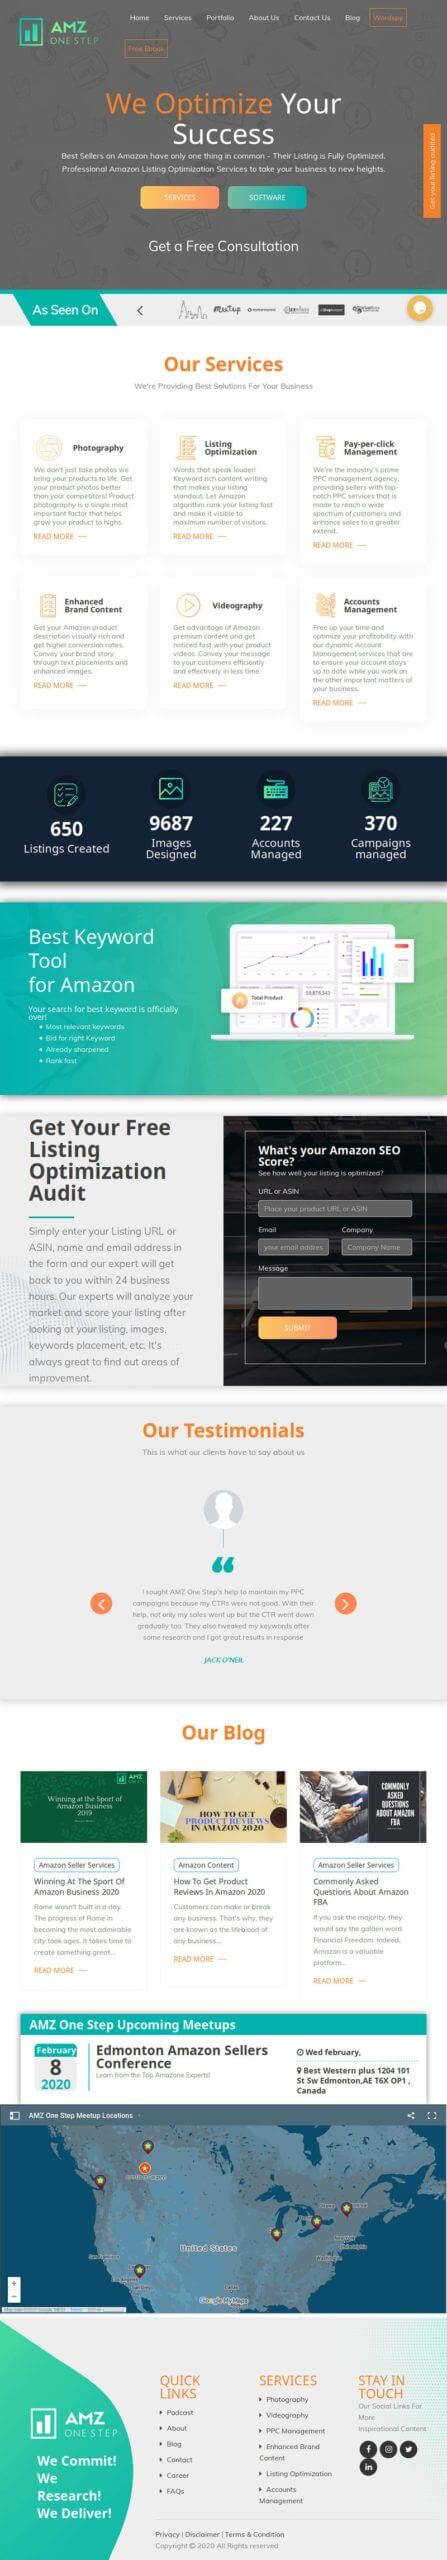 Amz One Step - Optimize For SEO Client